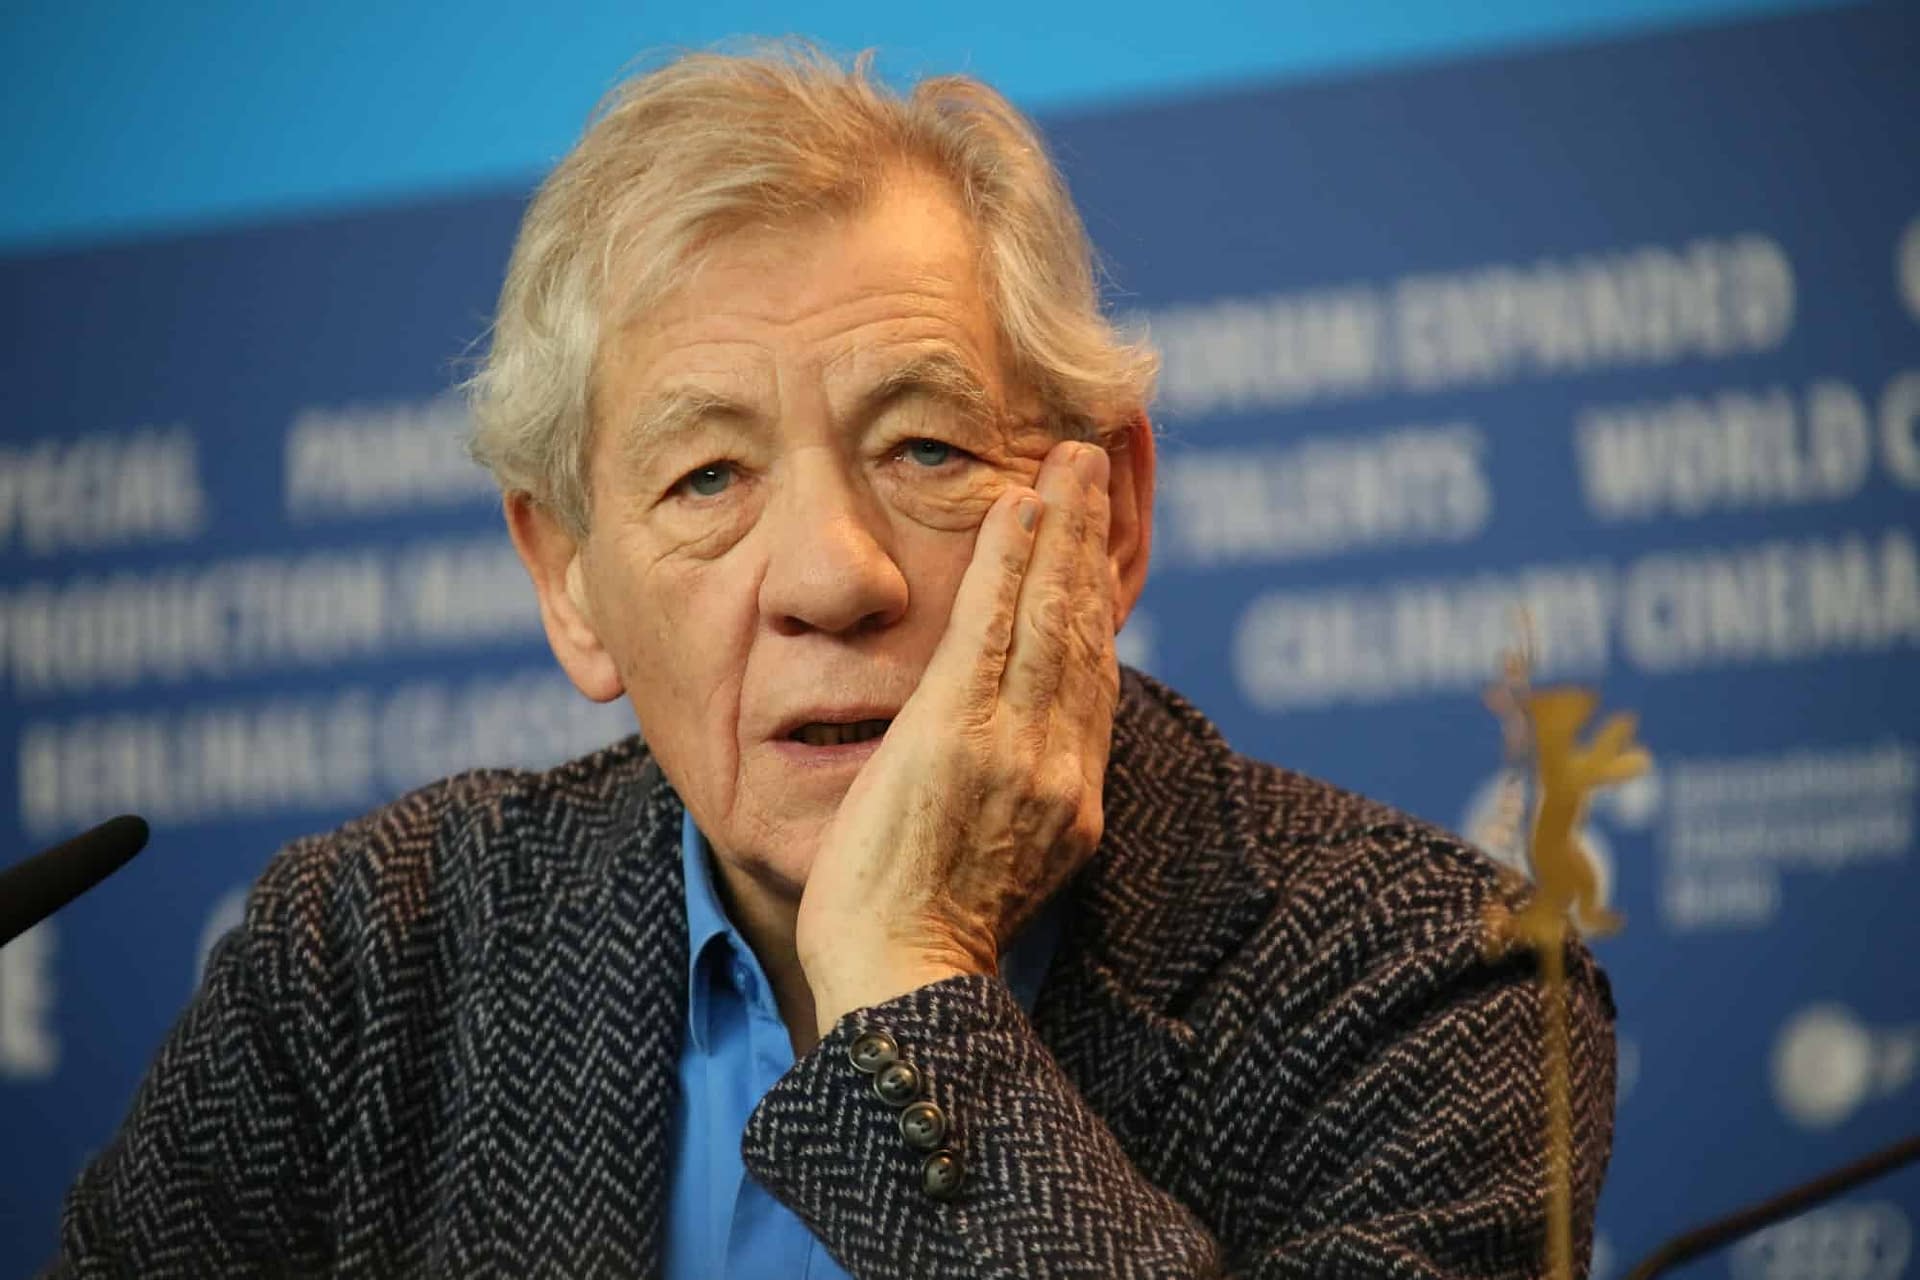 Sir Ian McKellen Comments on the Allegations Against Bryan Singer